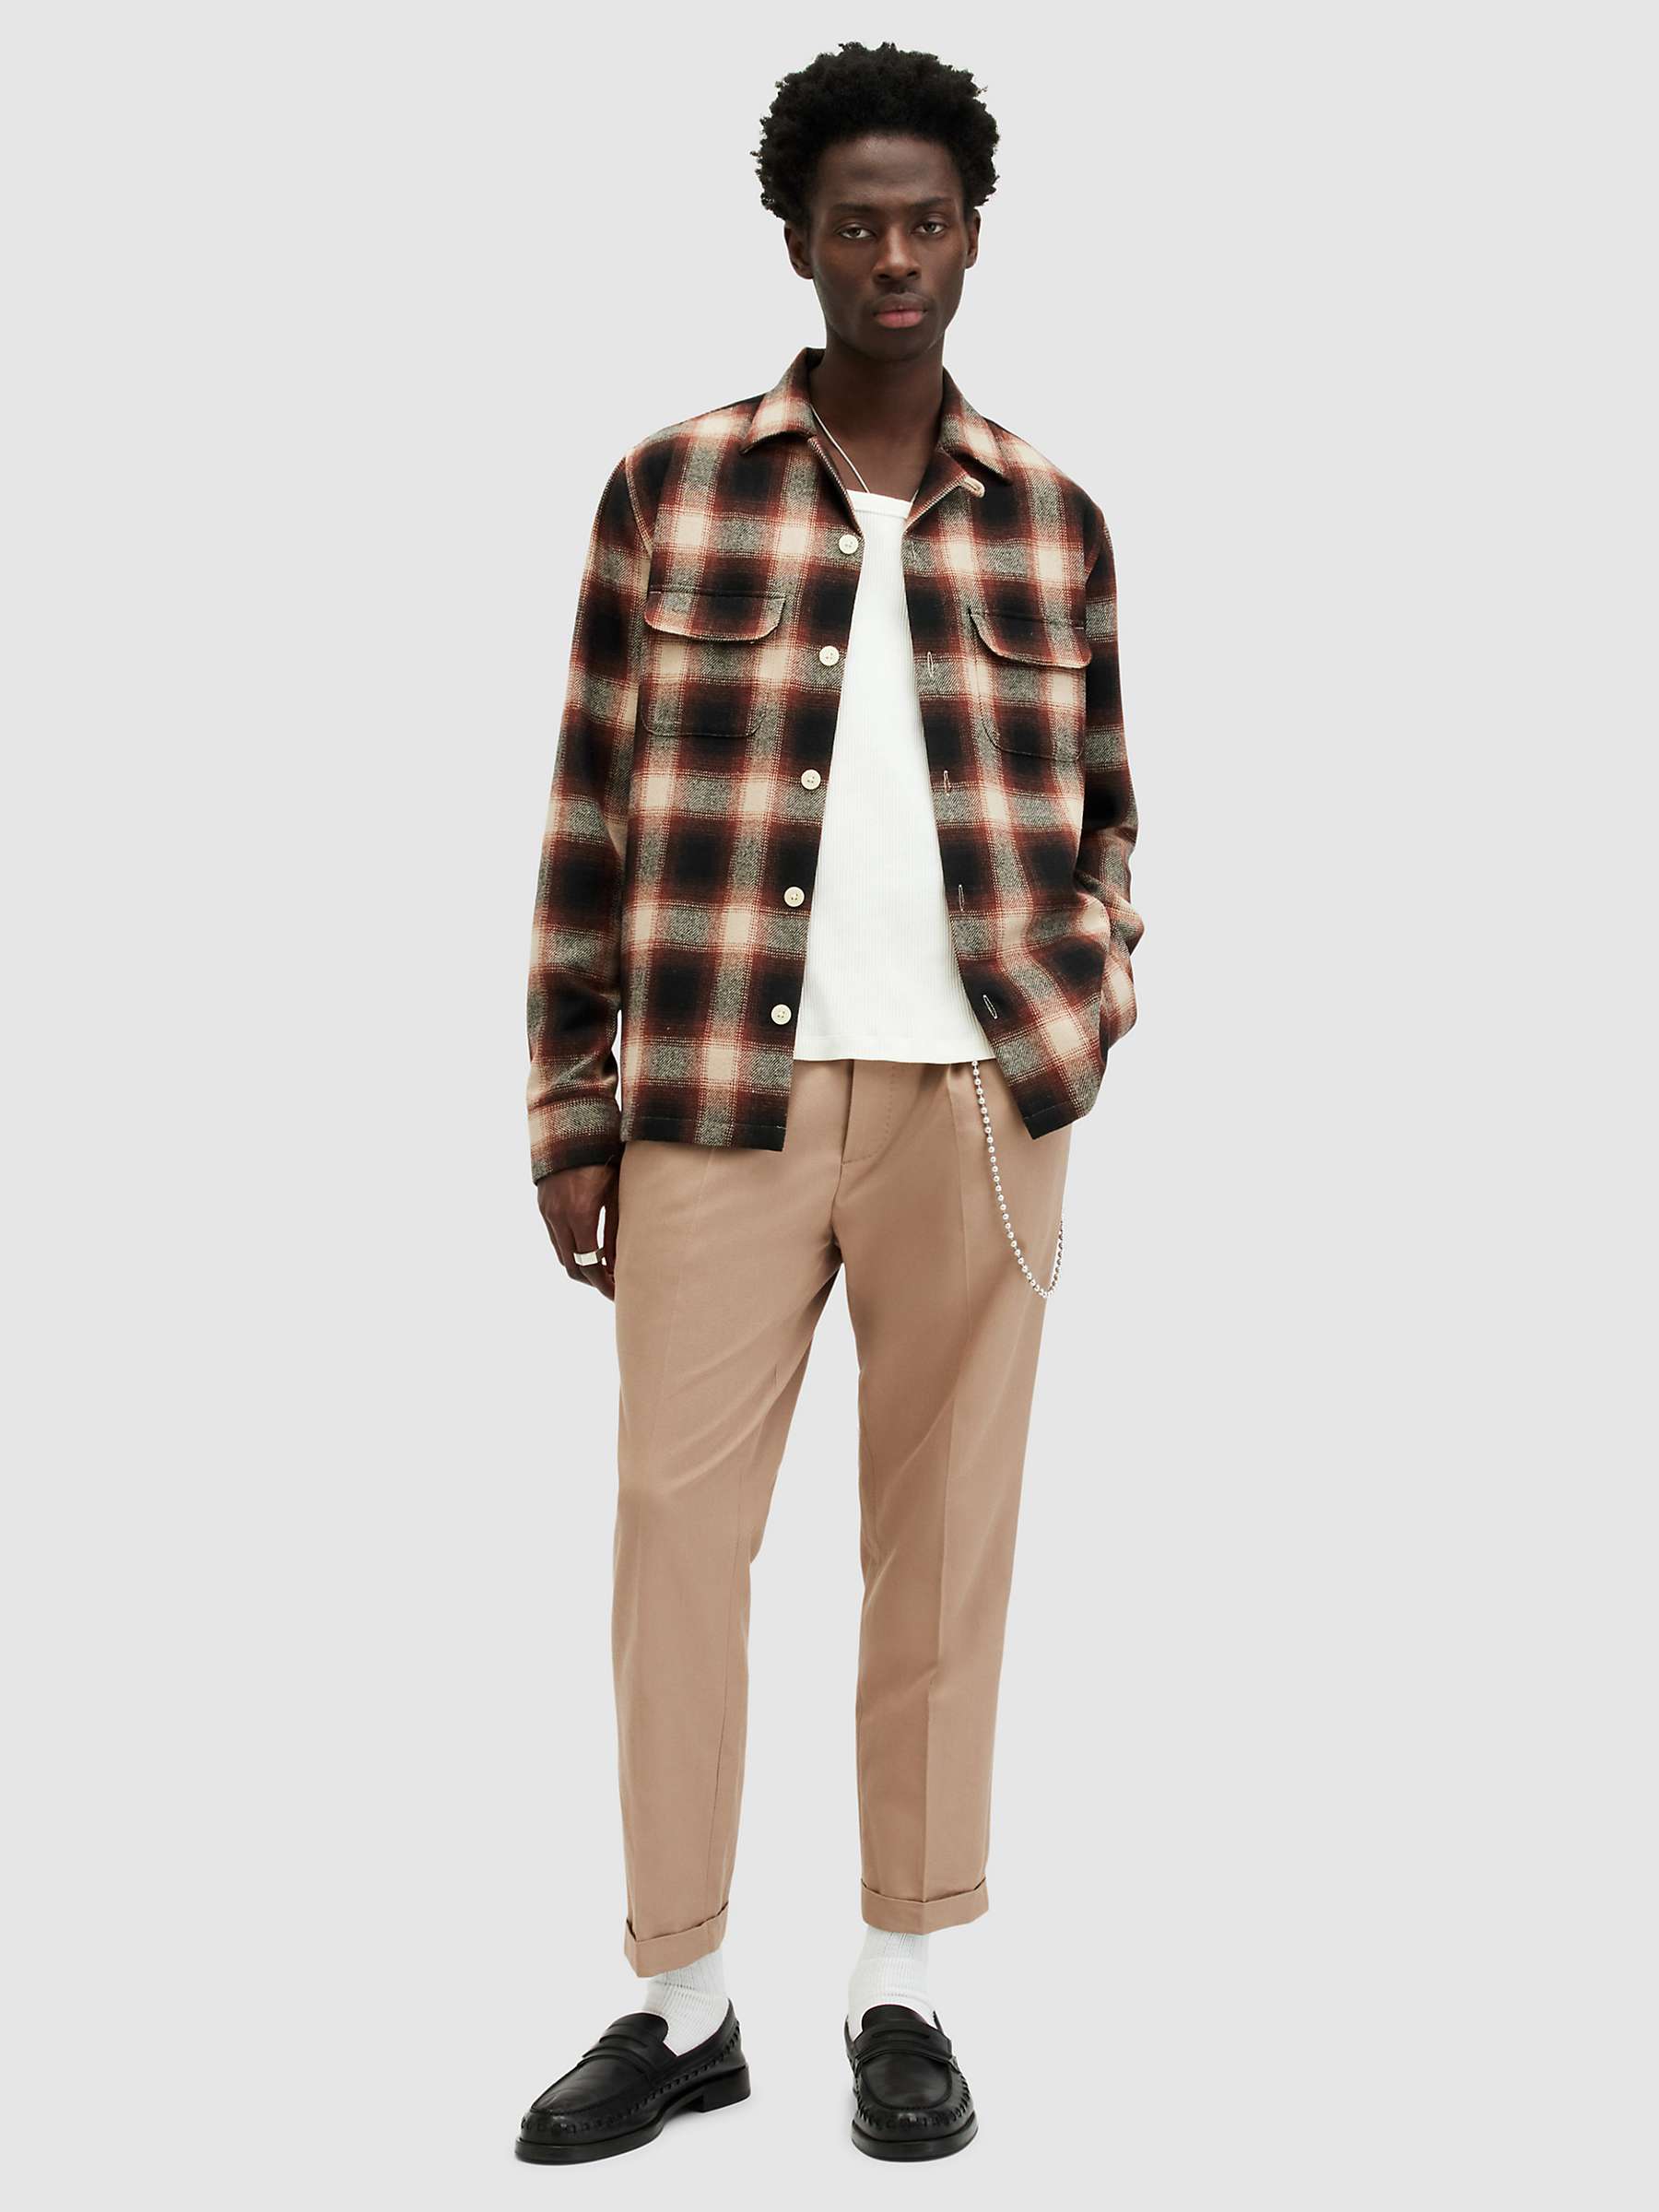 Buy AllSaints Tallis Wool Blend Trousers, Toffee Taupe Online at johnlewis.com